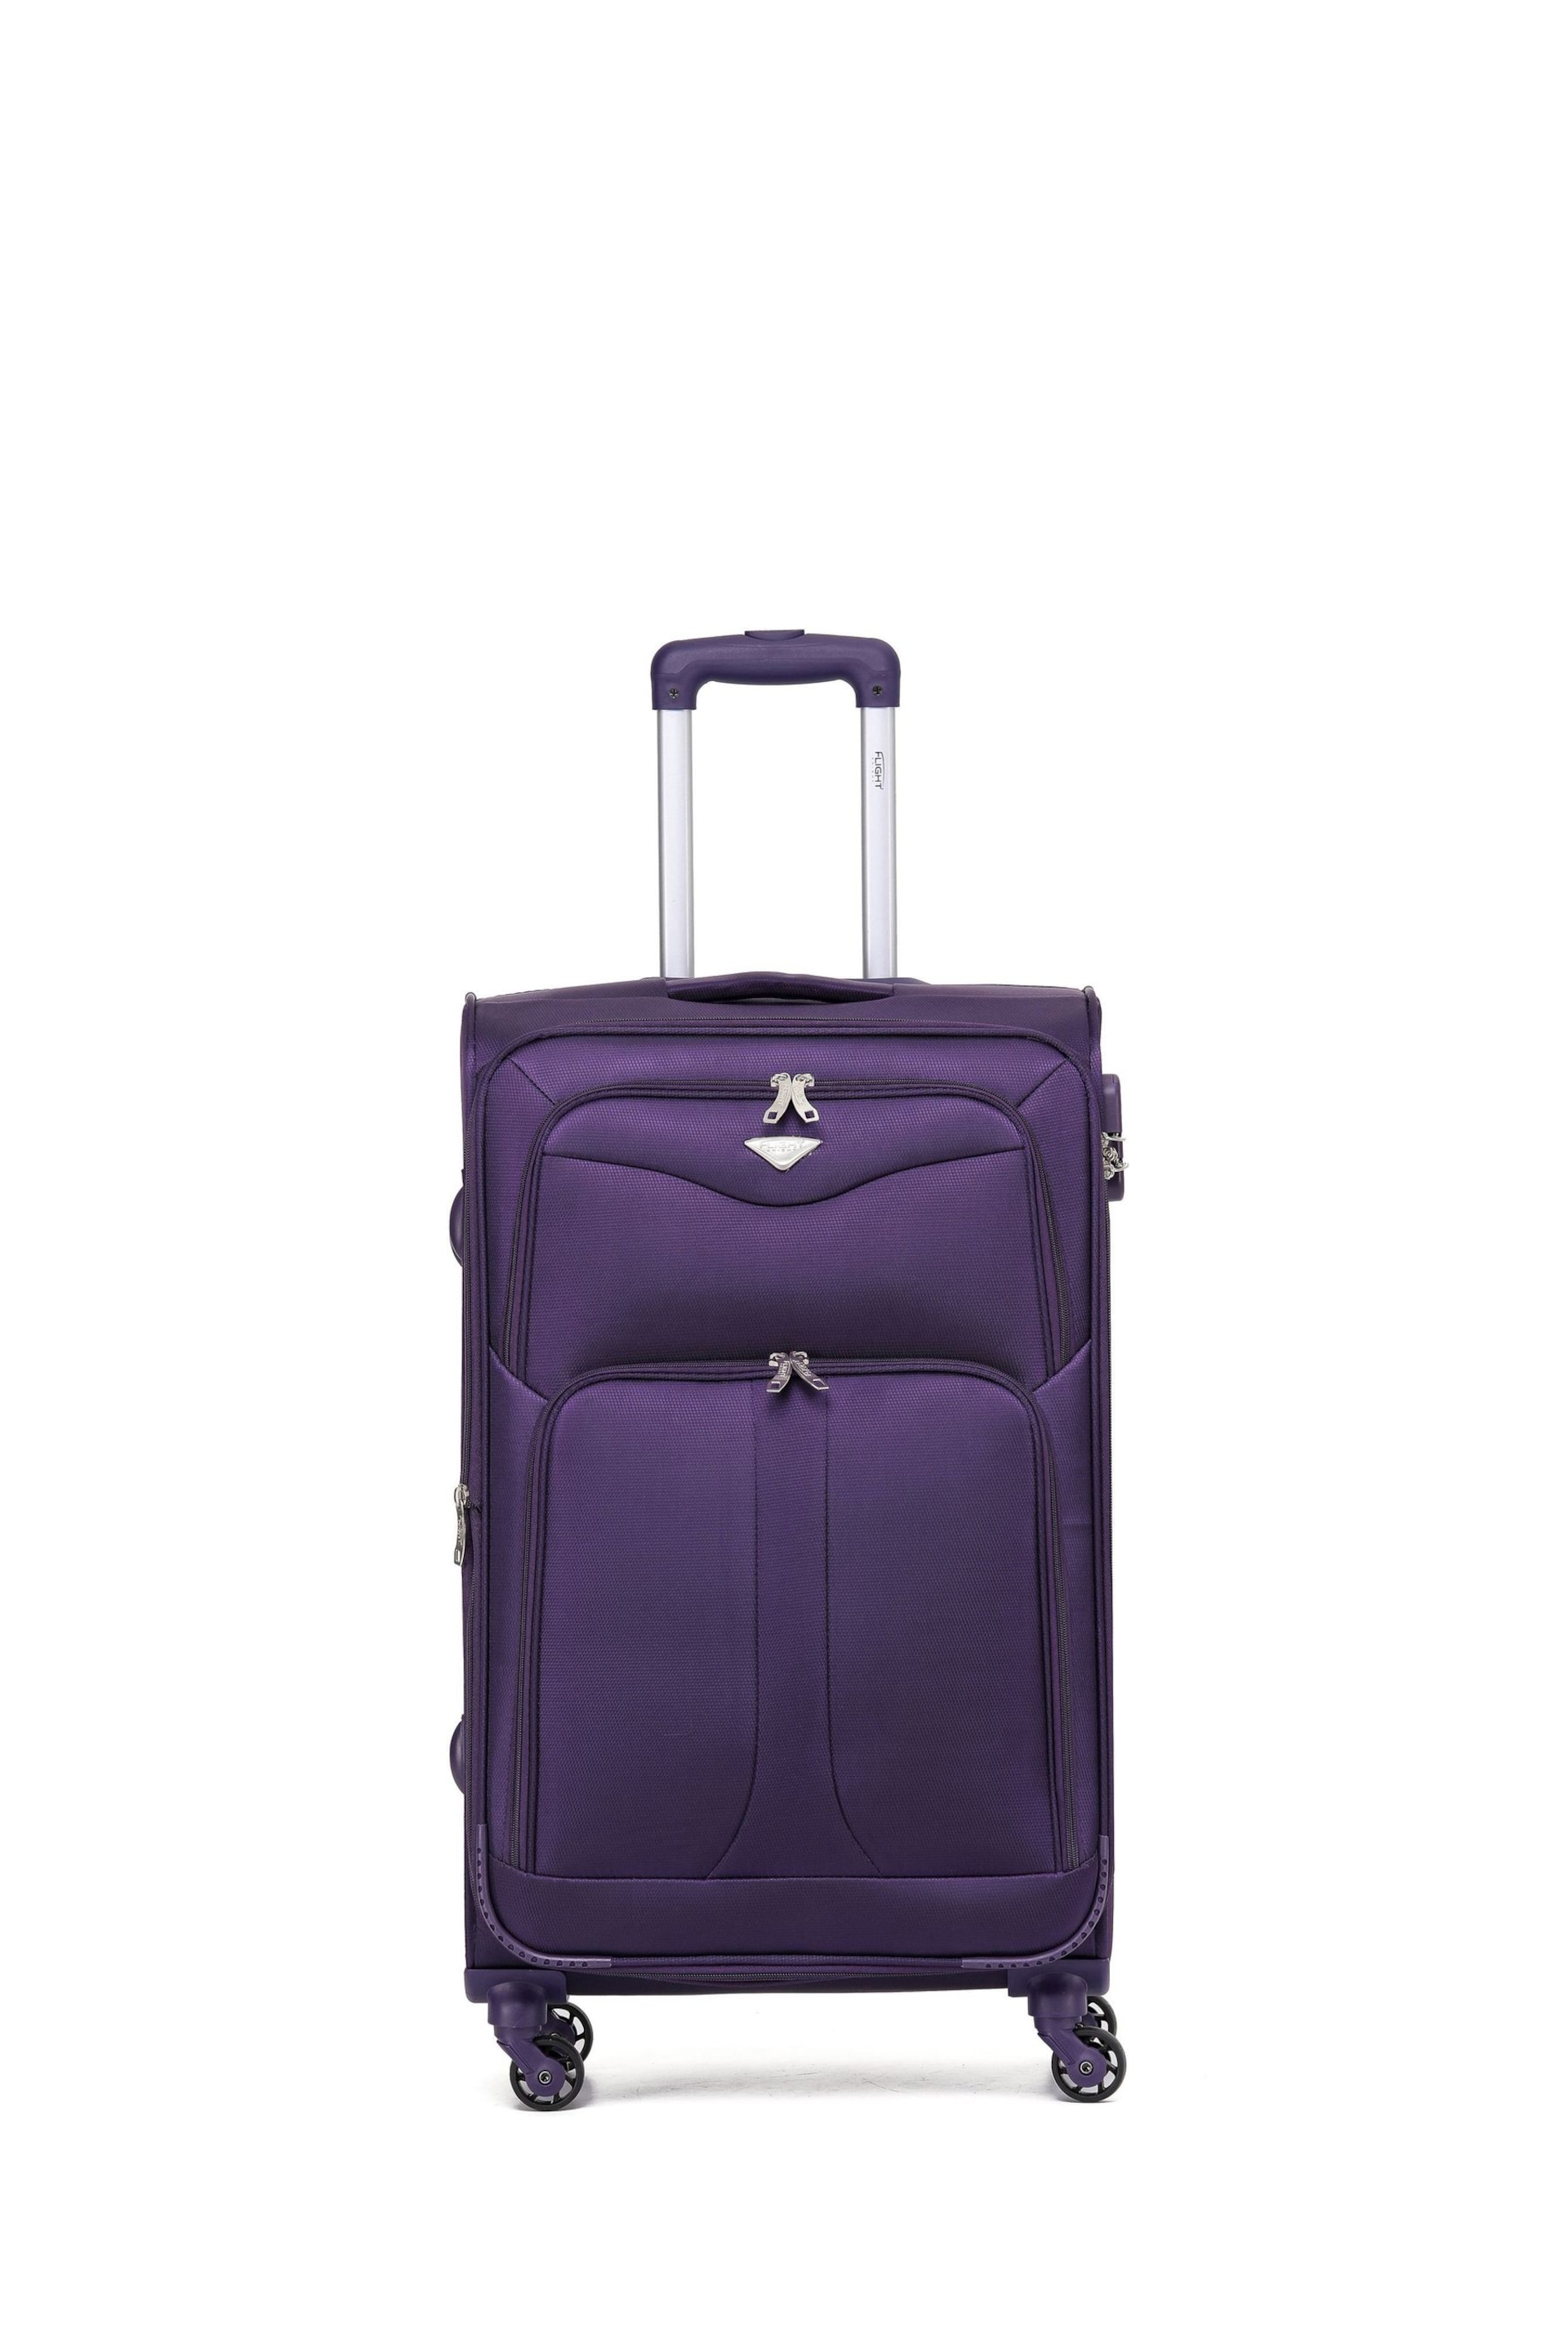 Flight Knight Medium Softcase Lightweight Check-In Suitcase With 4 Wheels - Image 6 of 6